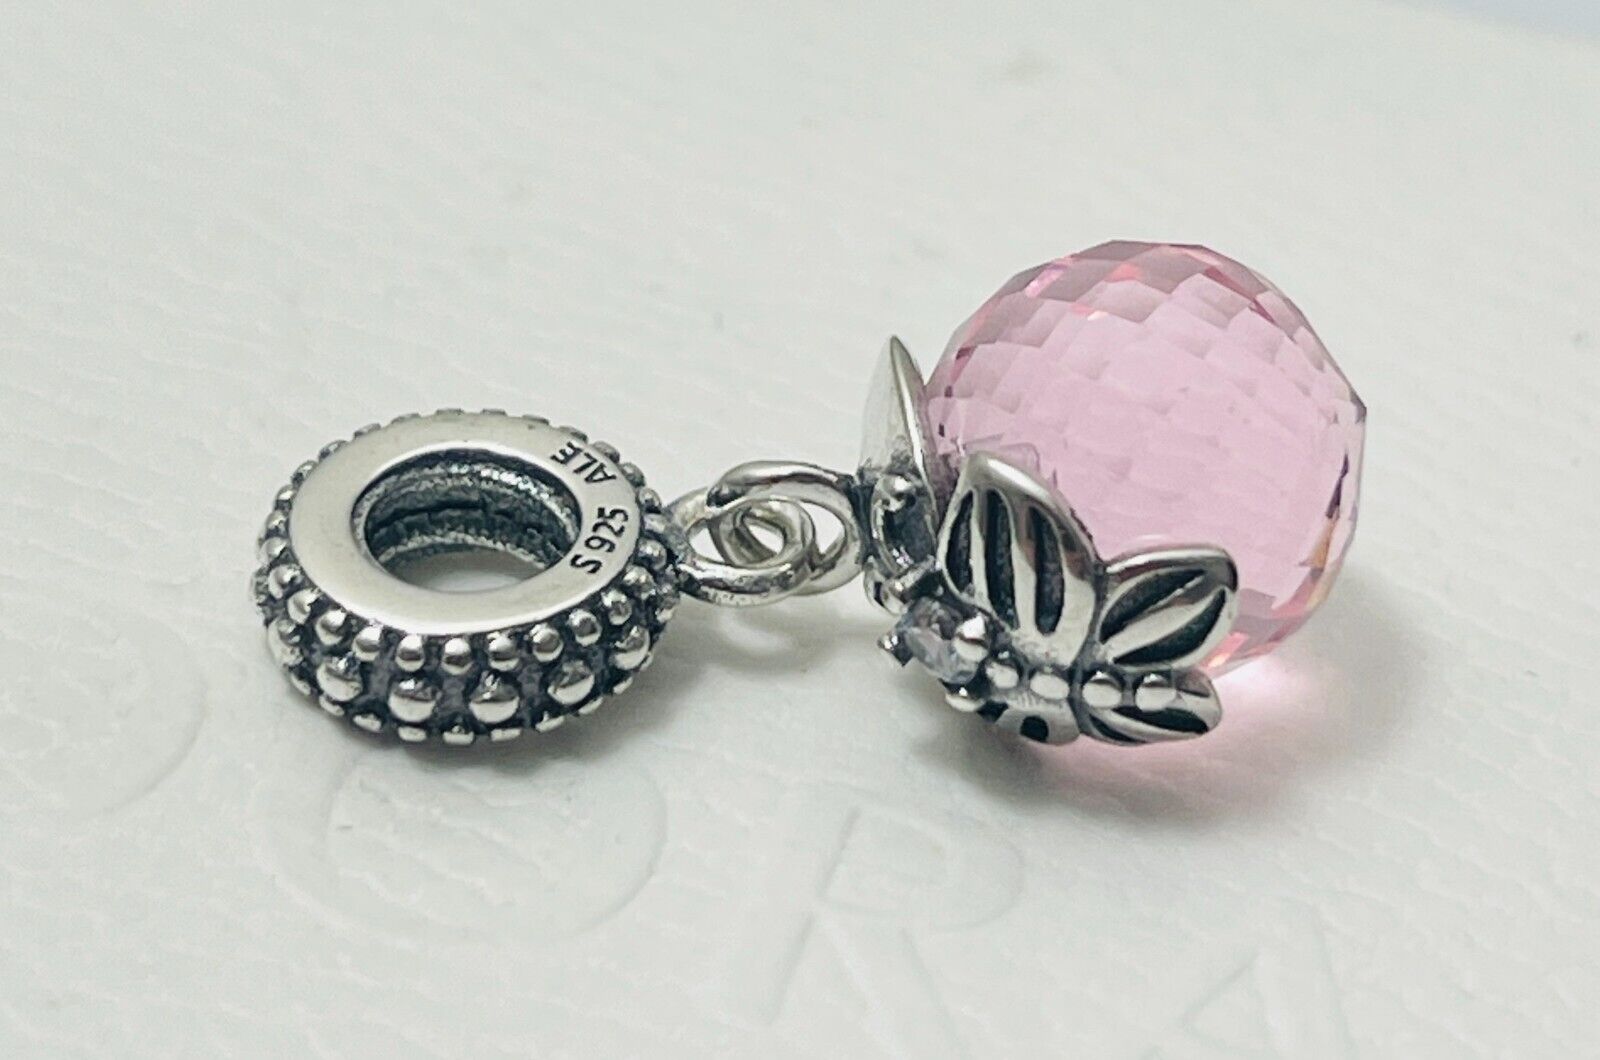 New Pandora Morning Butterfly Dangle Pink Charm Bead w/pouch